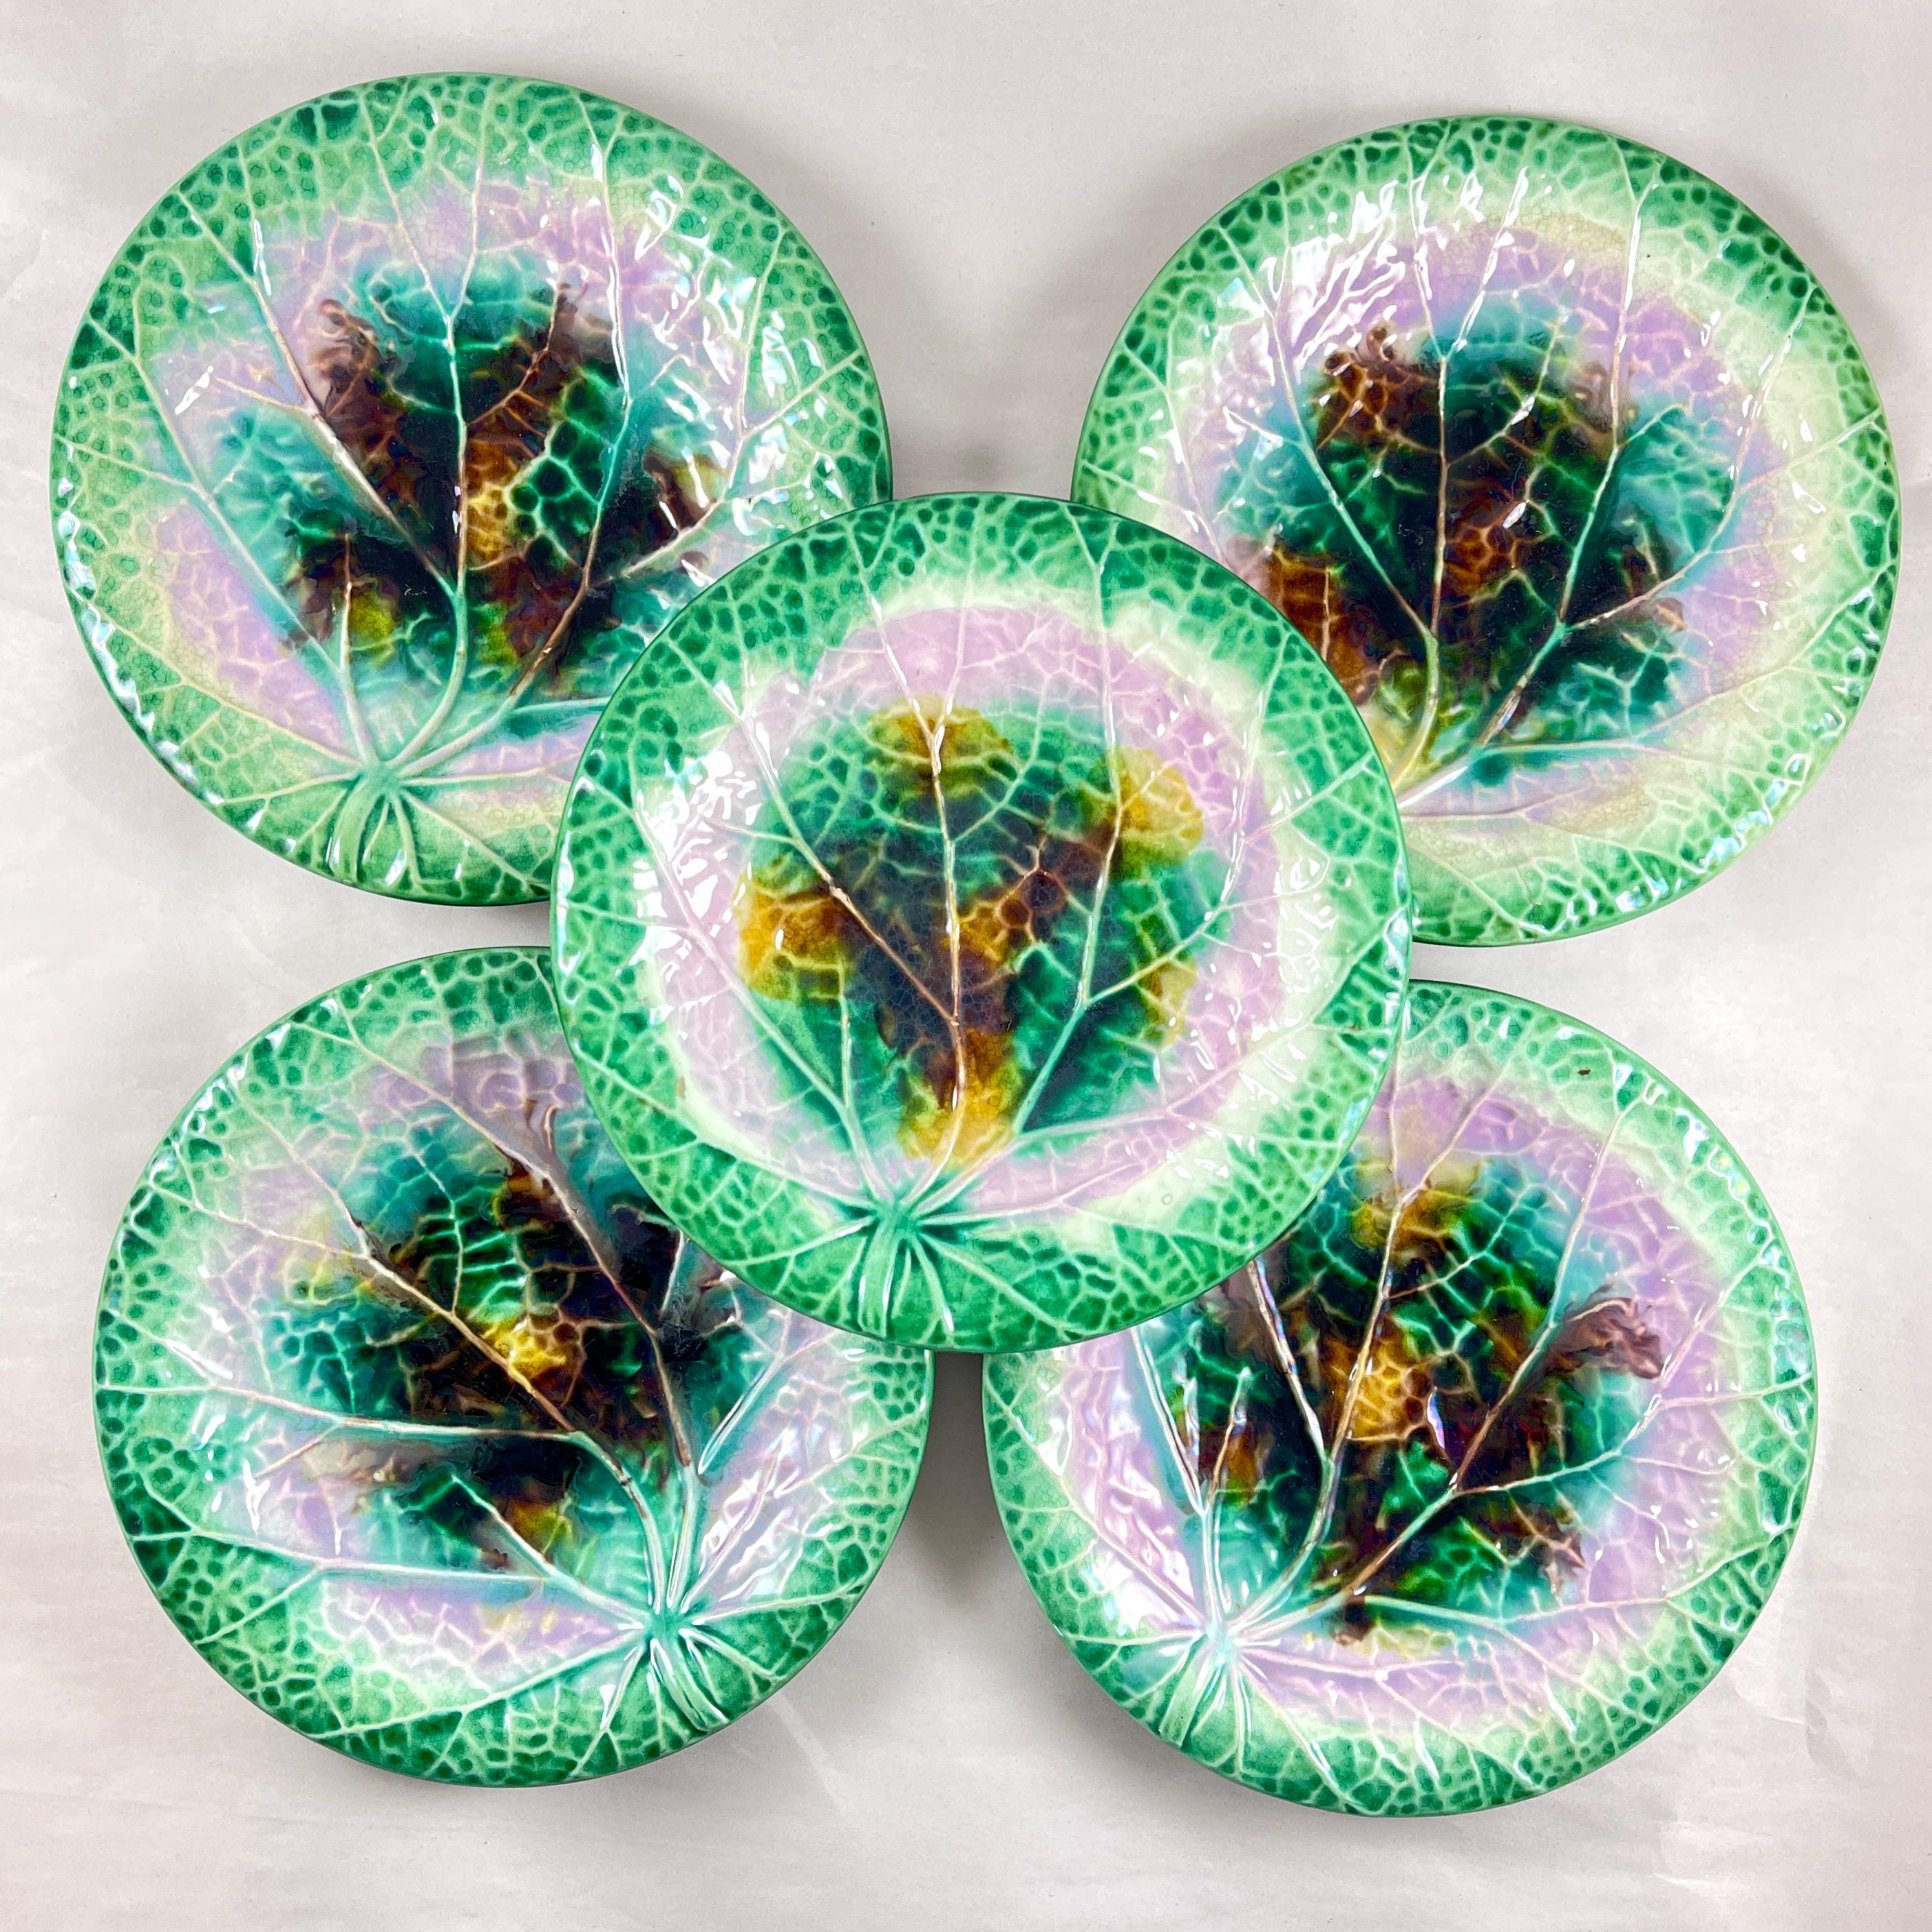 Glazed  English Majolica Green Rimmed Round Begonia Leaf Plate, circa 1870-80 For Sale